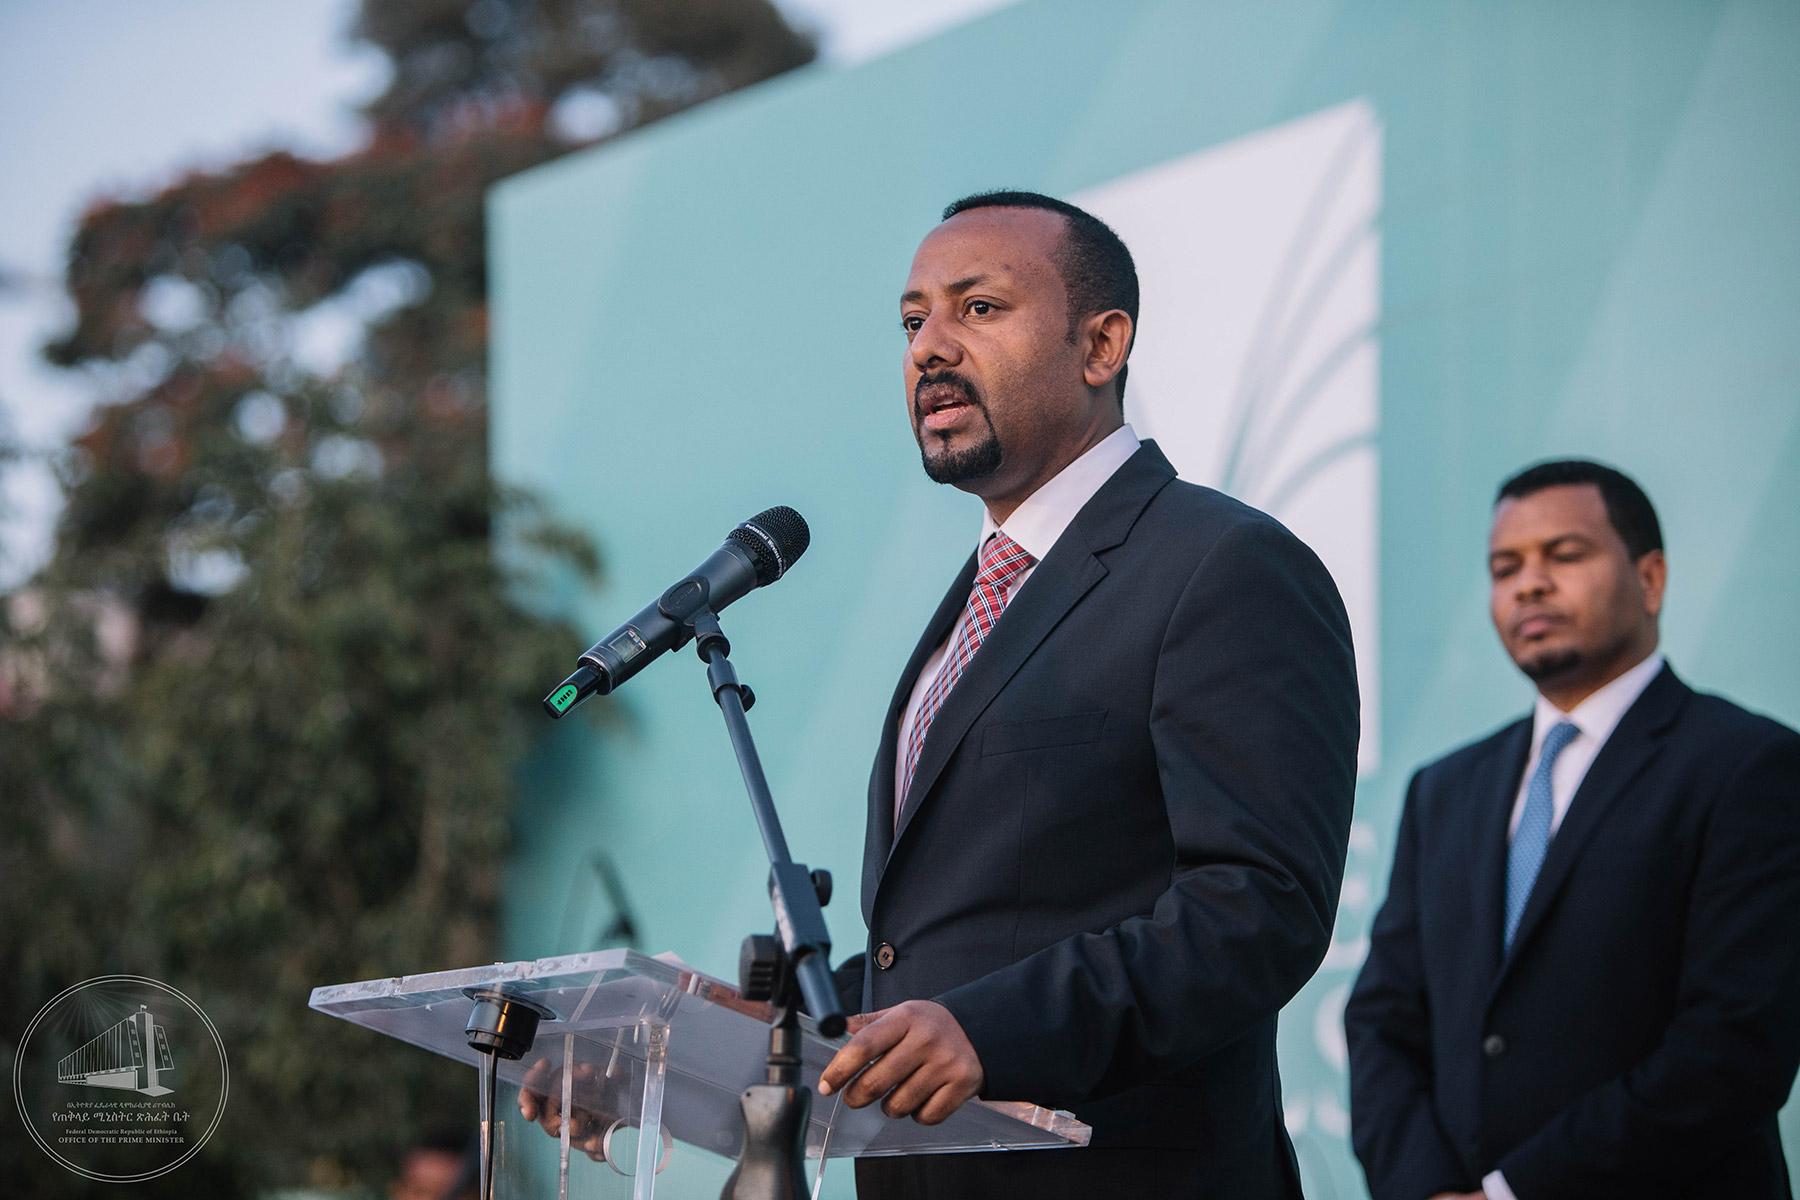 PM Abiy Ahmed at an inauguration event in Addis Ababa. Photo: Office of the Prime Minister â Ethiopia